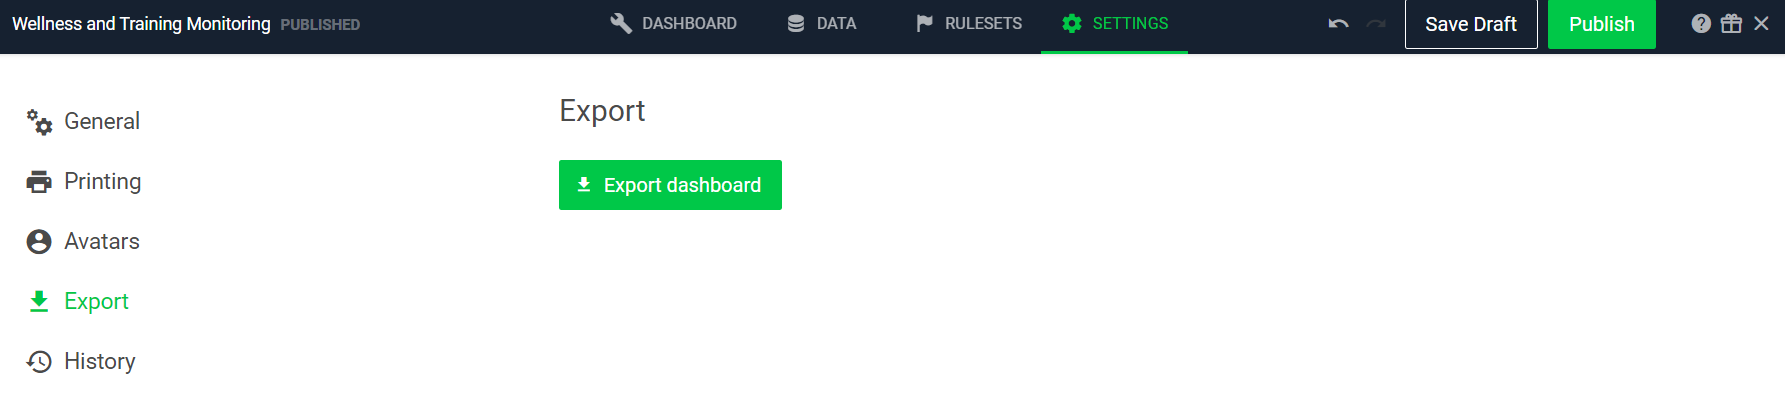 An image of the Export page in dashboard settings.